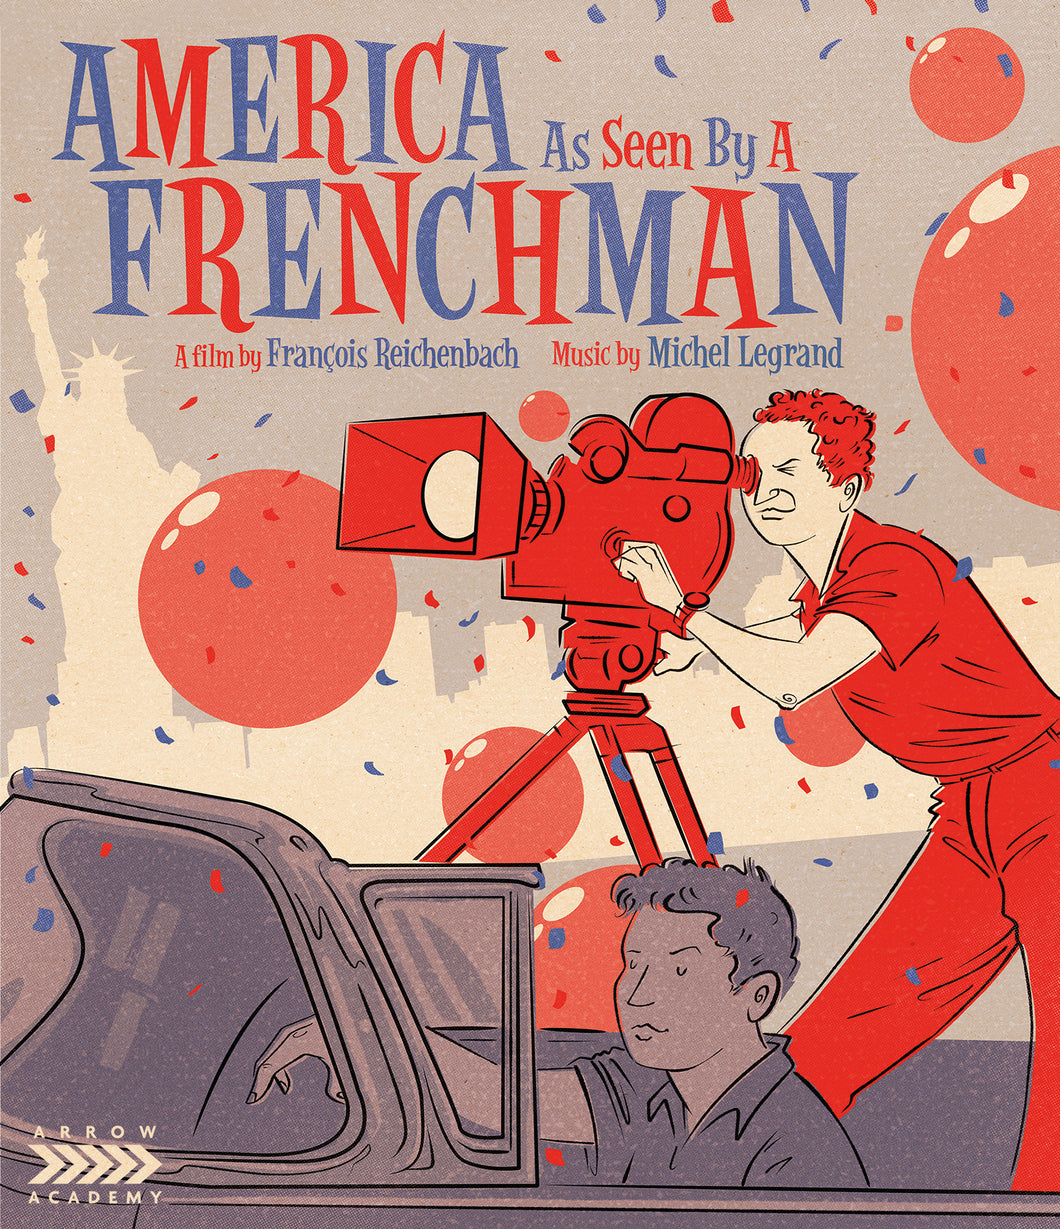 America As Seen By A Frenchman (Blu-ray)